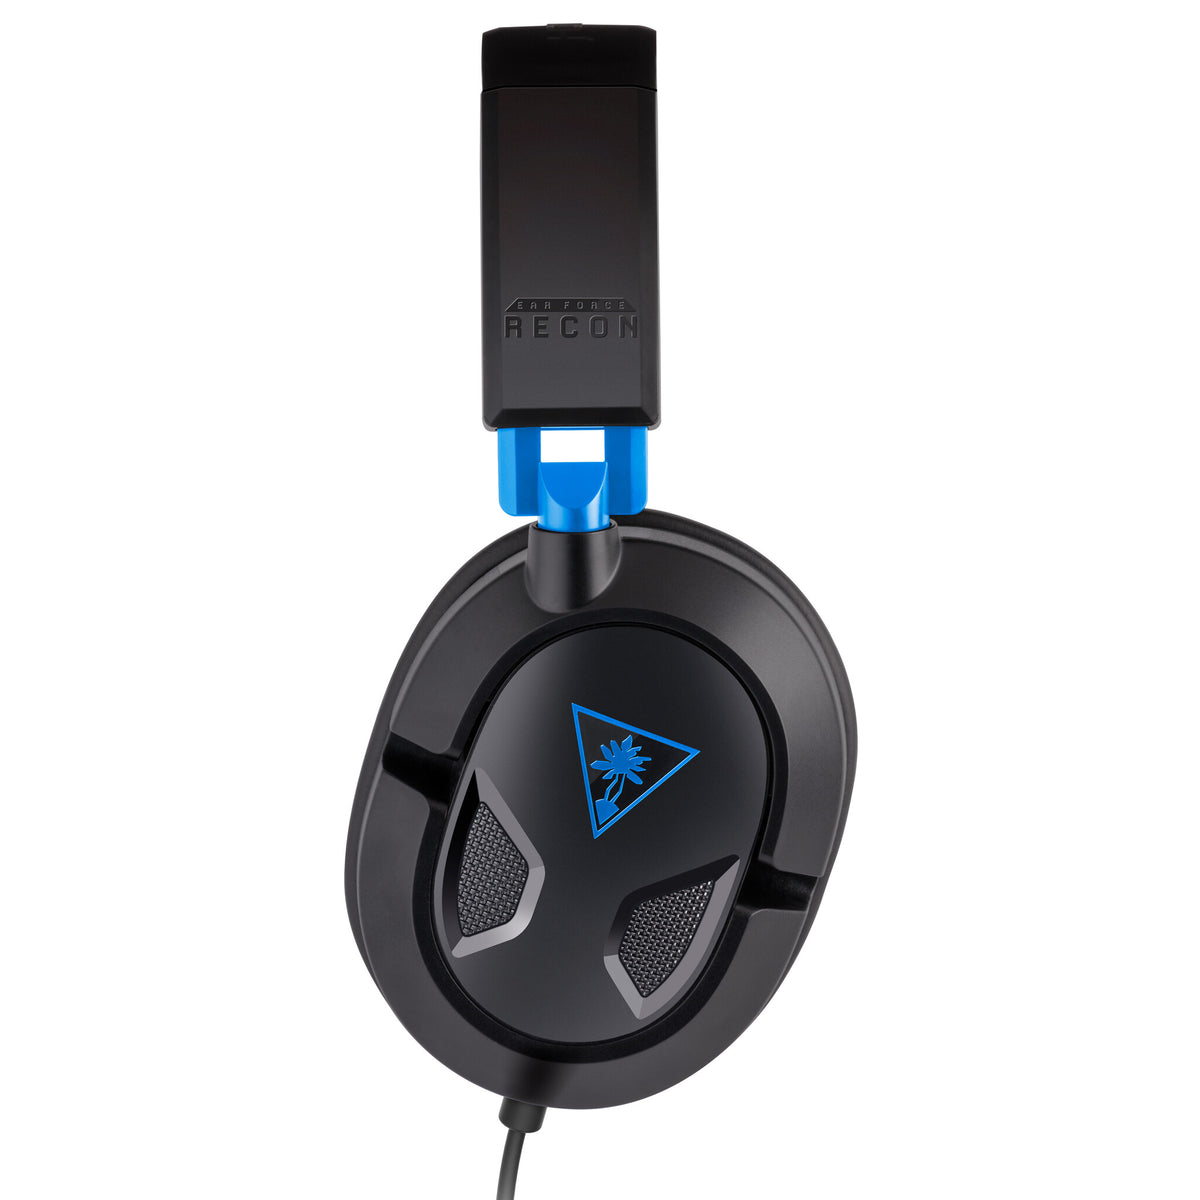 Turtle Beach Recon 50P - 3.5mm Wired Gaming Headset in Black / Blue